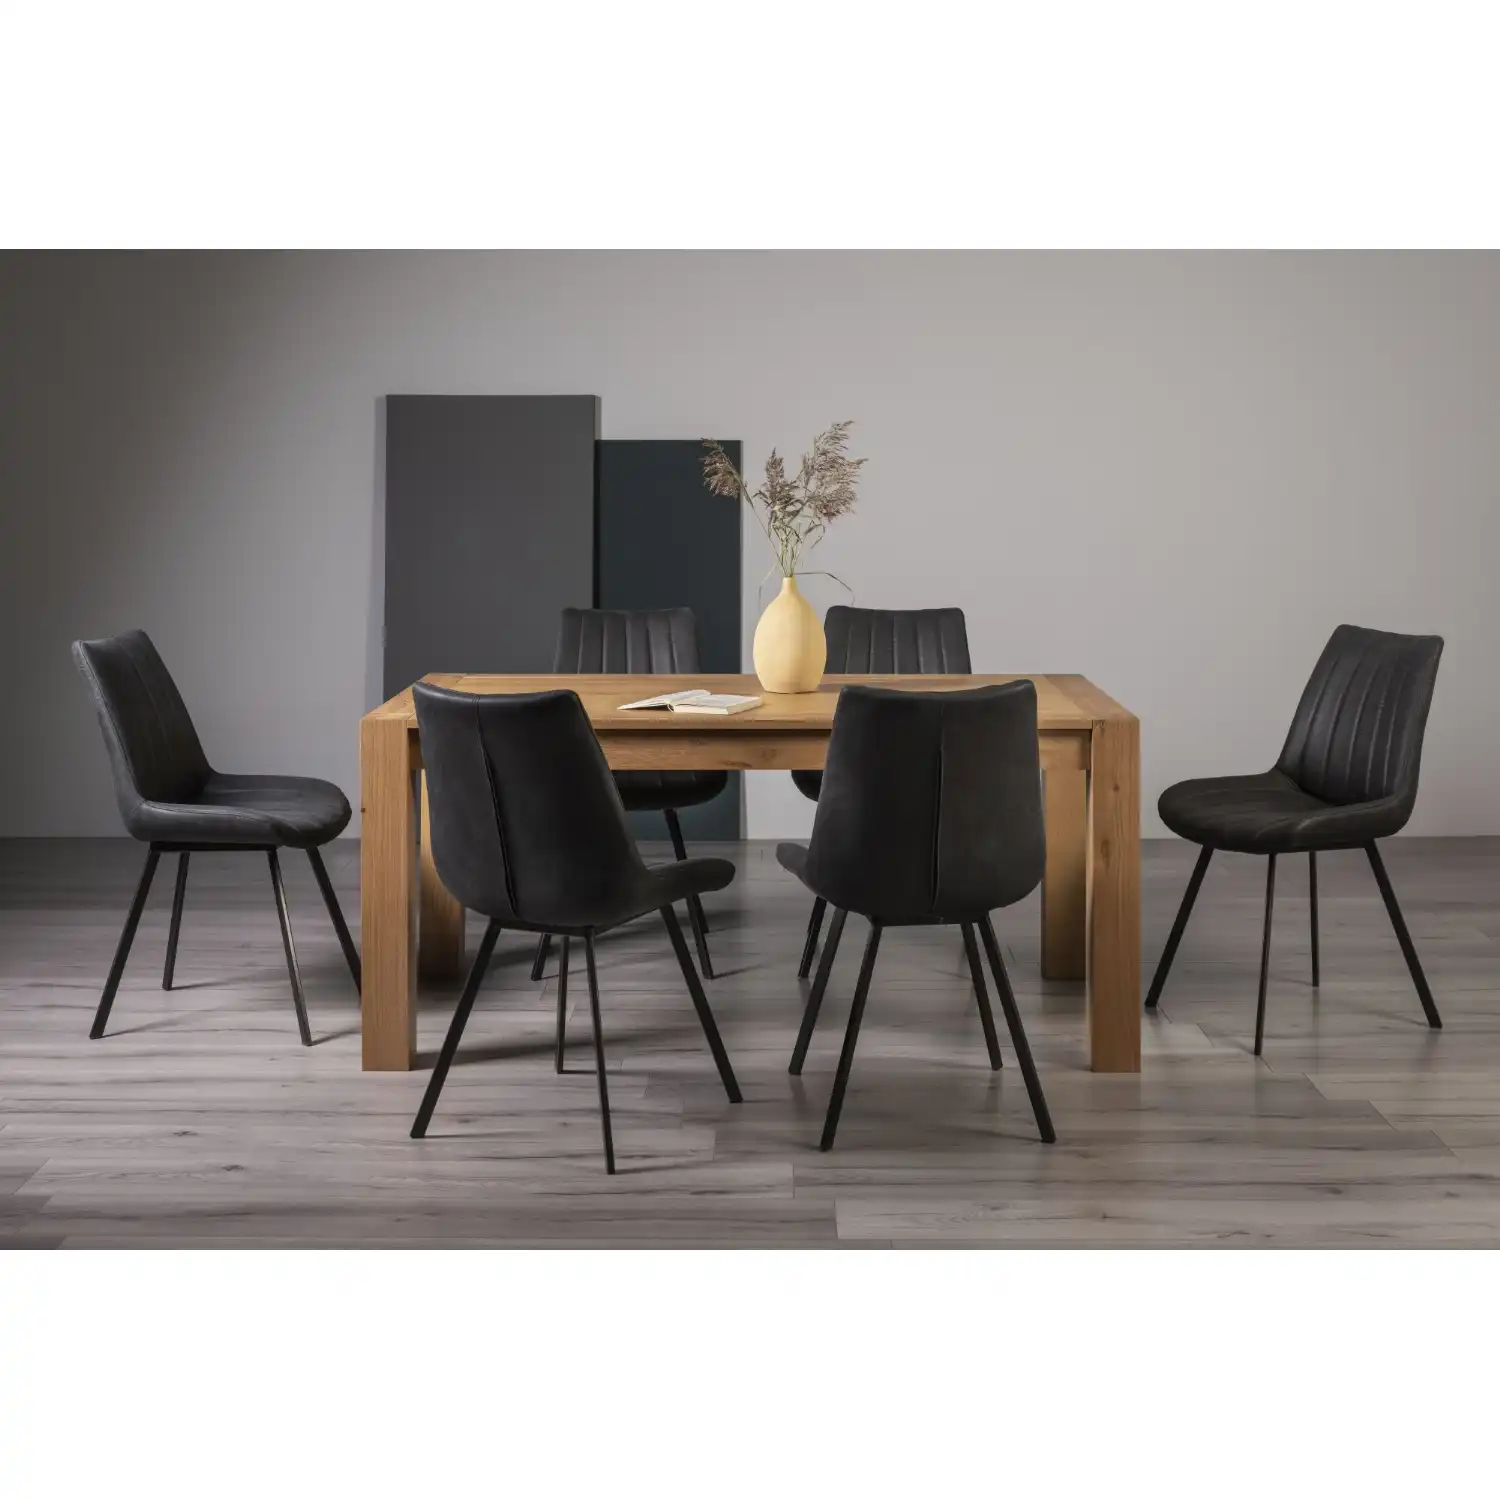 Light Oak Dining Table Set 6 Dark Grey Suede Chairs